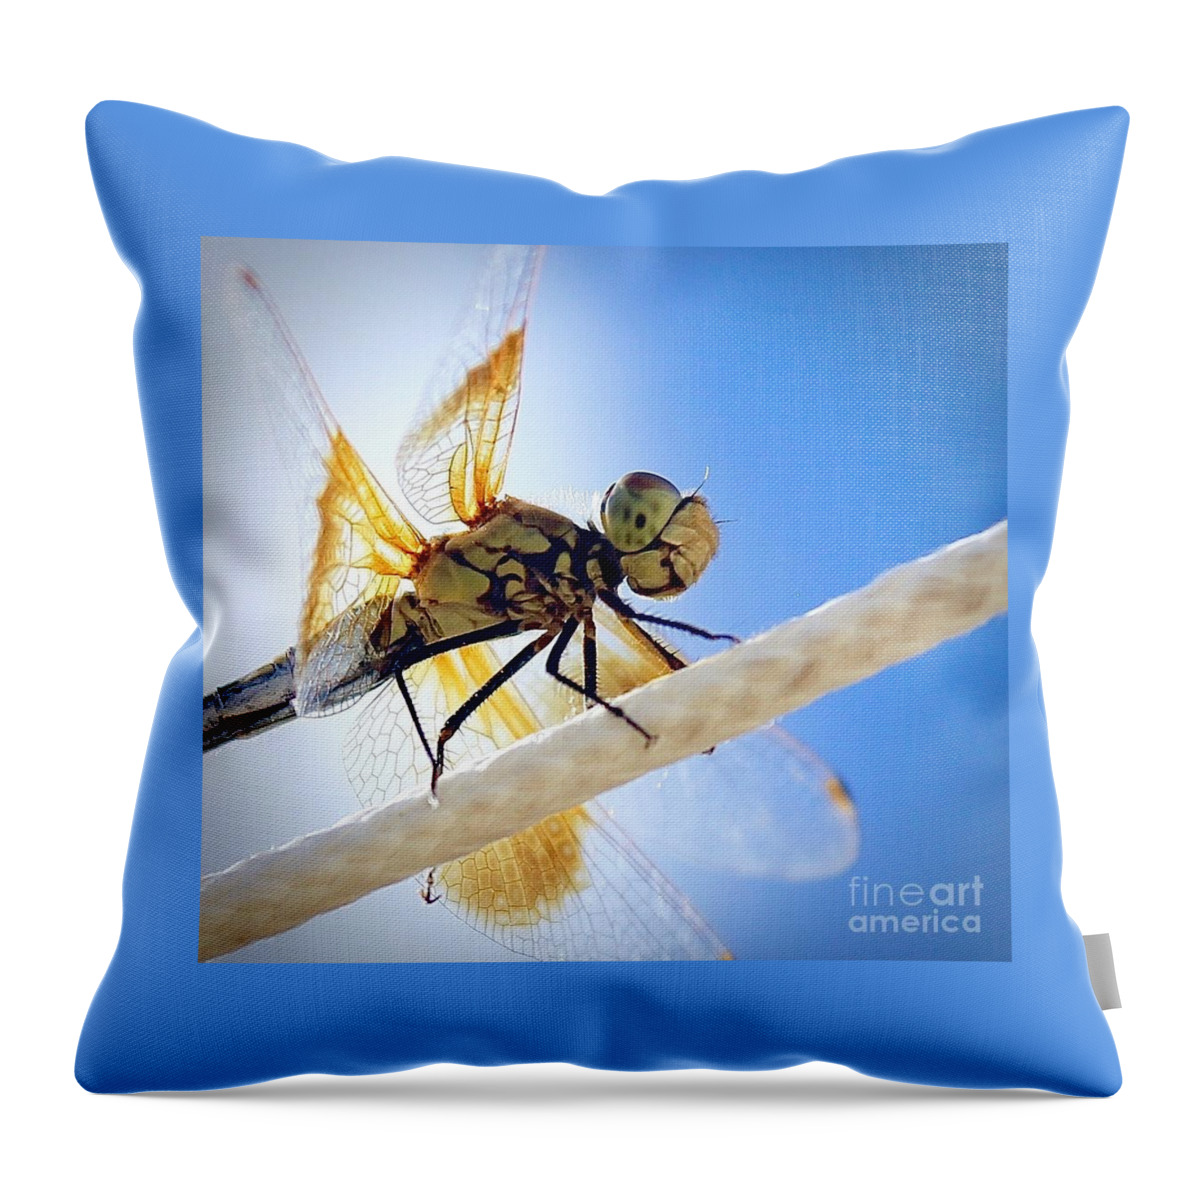 Eastern Amberwing Dragon Fly Throw Pillow featuring the photograph Libelle by Elisabeth Derichs